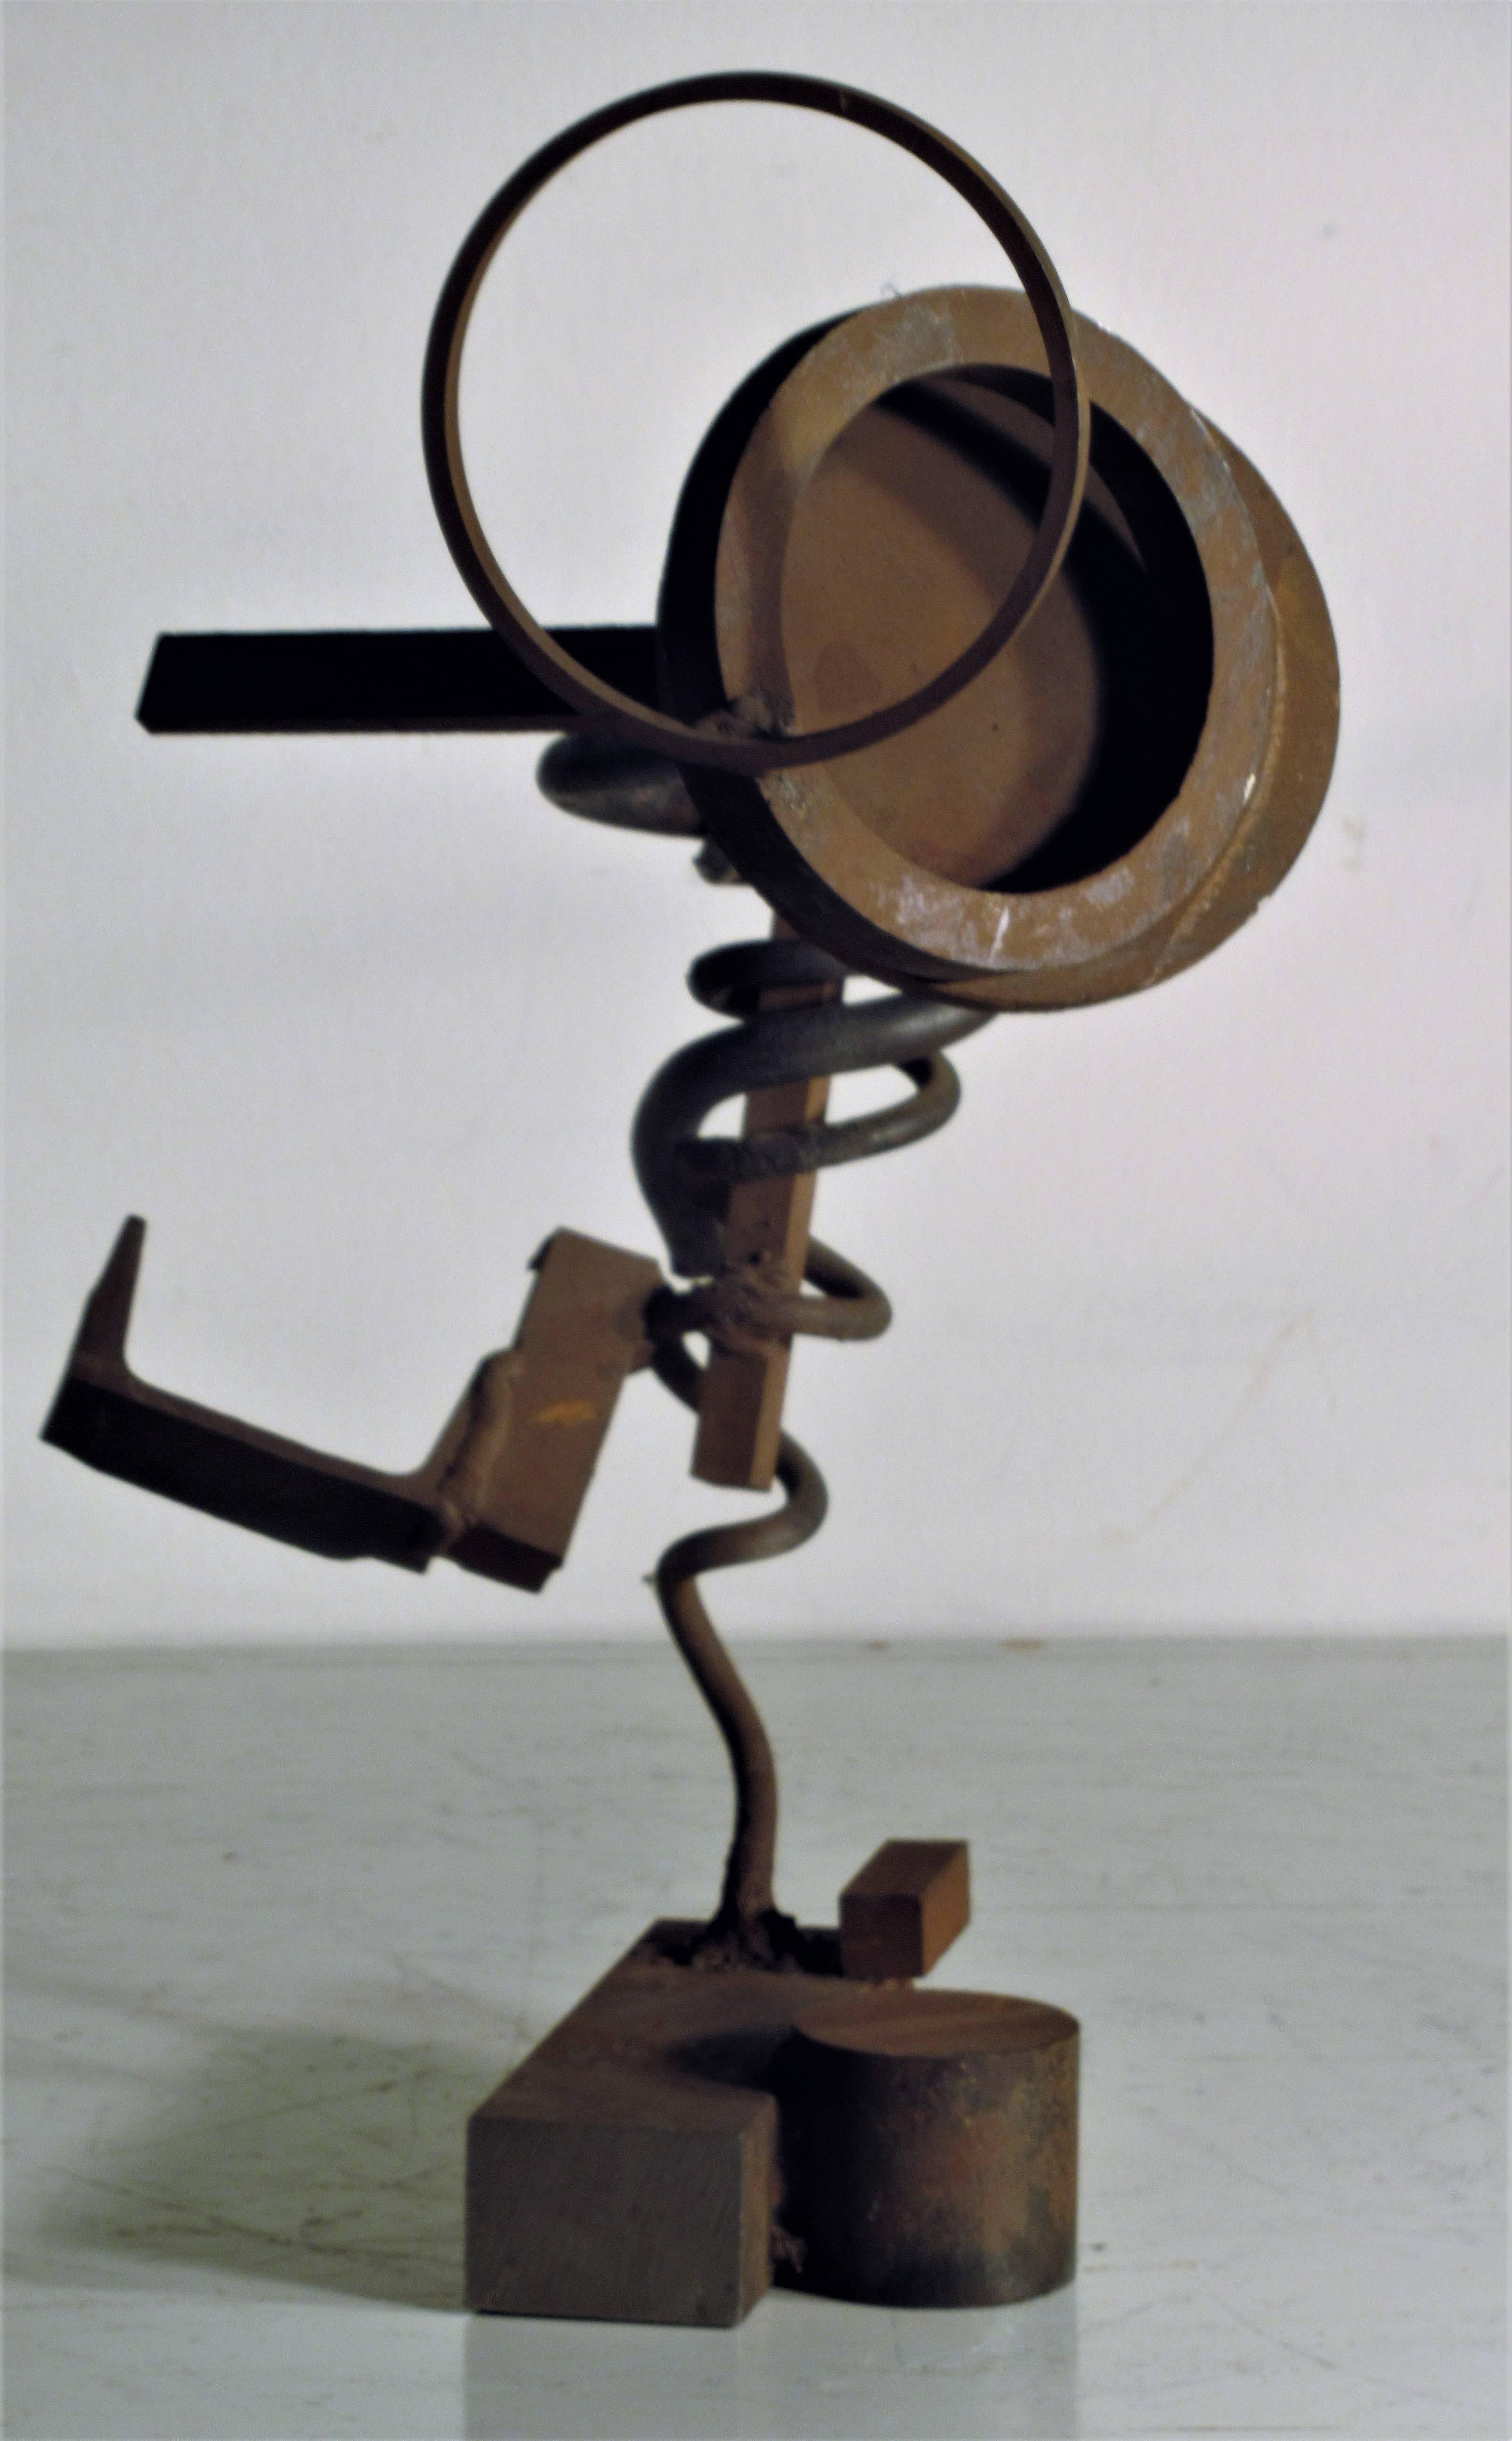   Steel Construction Sculpture by William Sellers 8